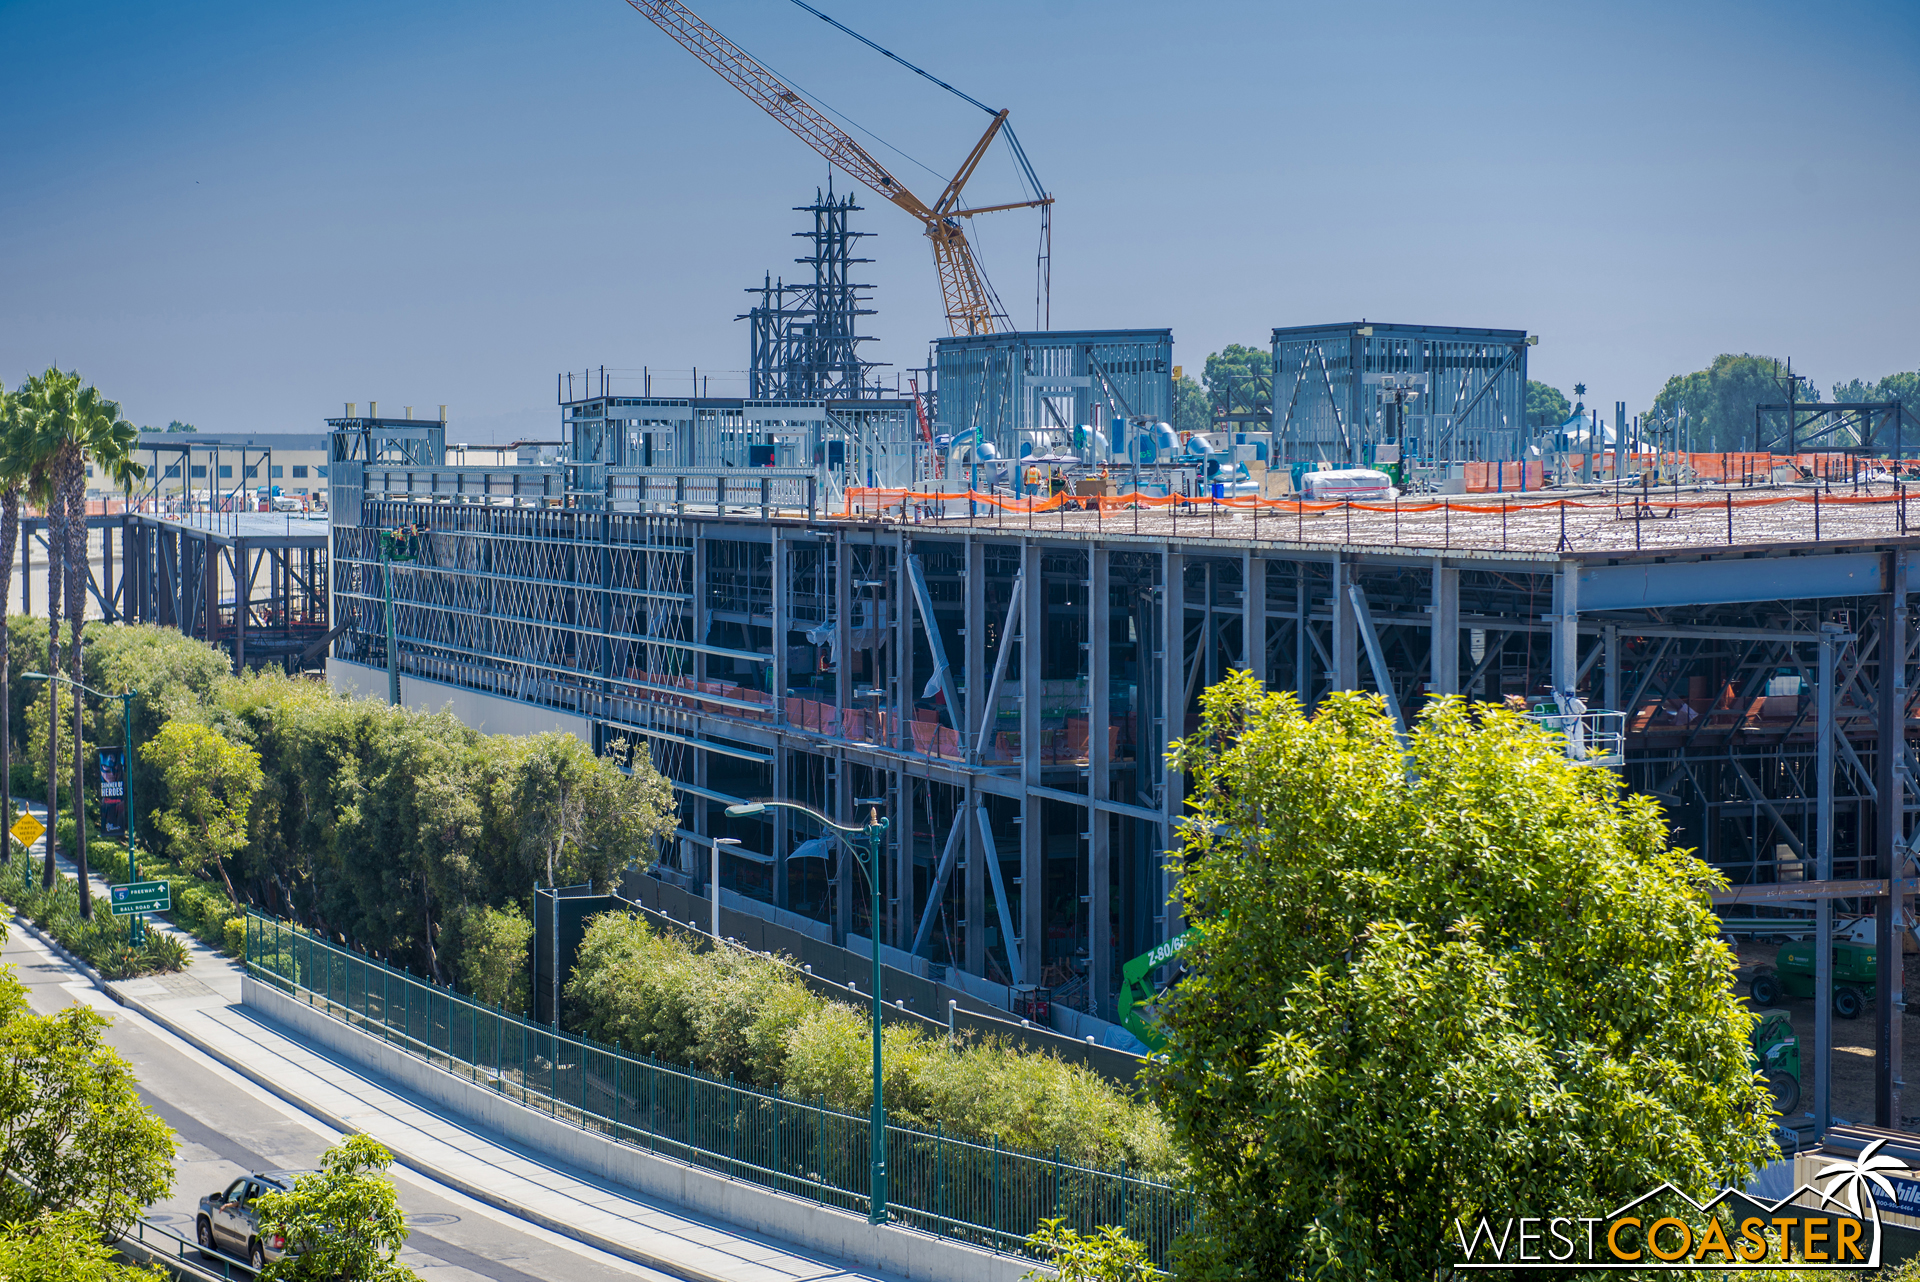  On the Disneyland Drive side of the First Order building, wall panels are starting to go up, beginning the process of enclosing the building. 